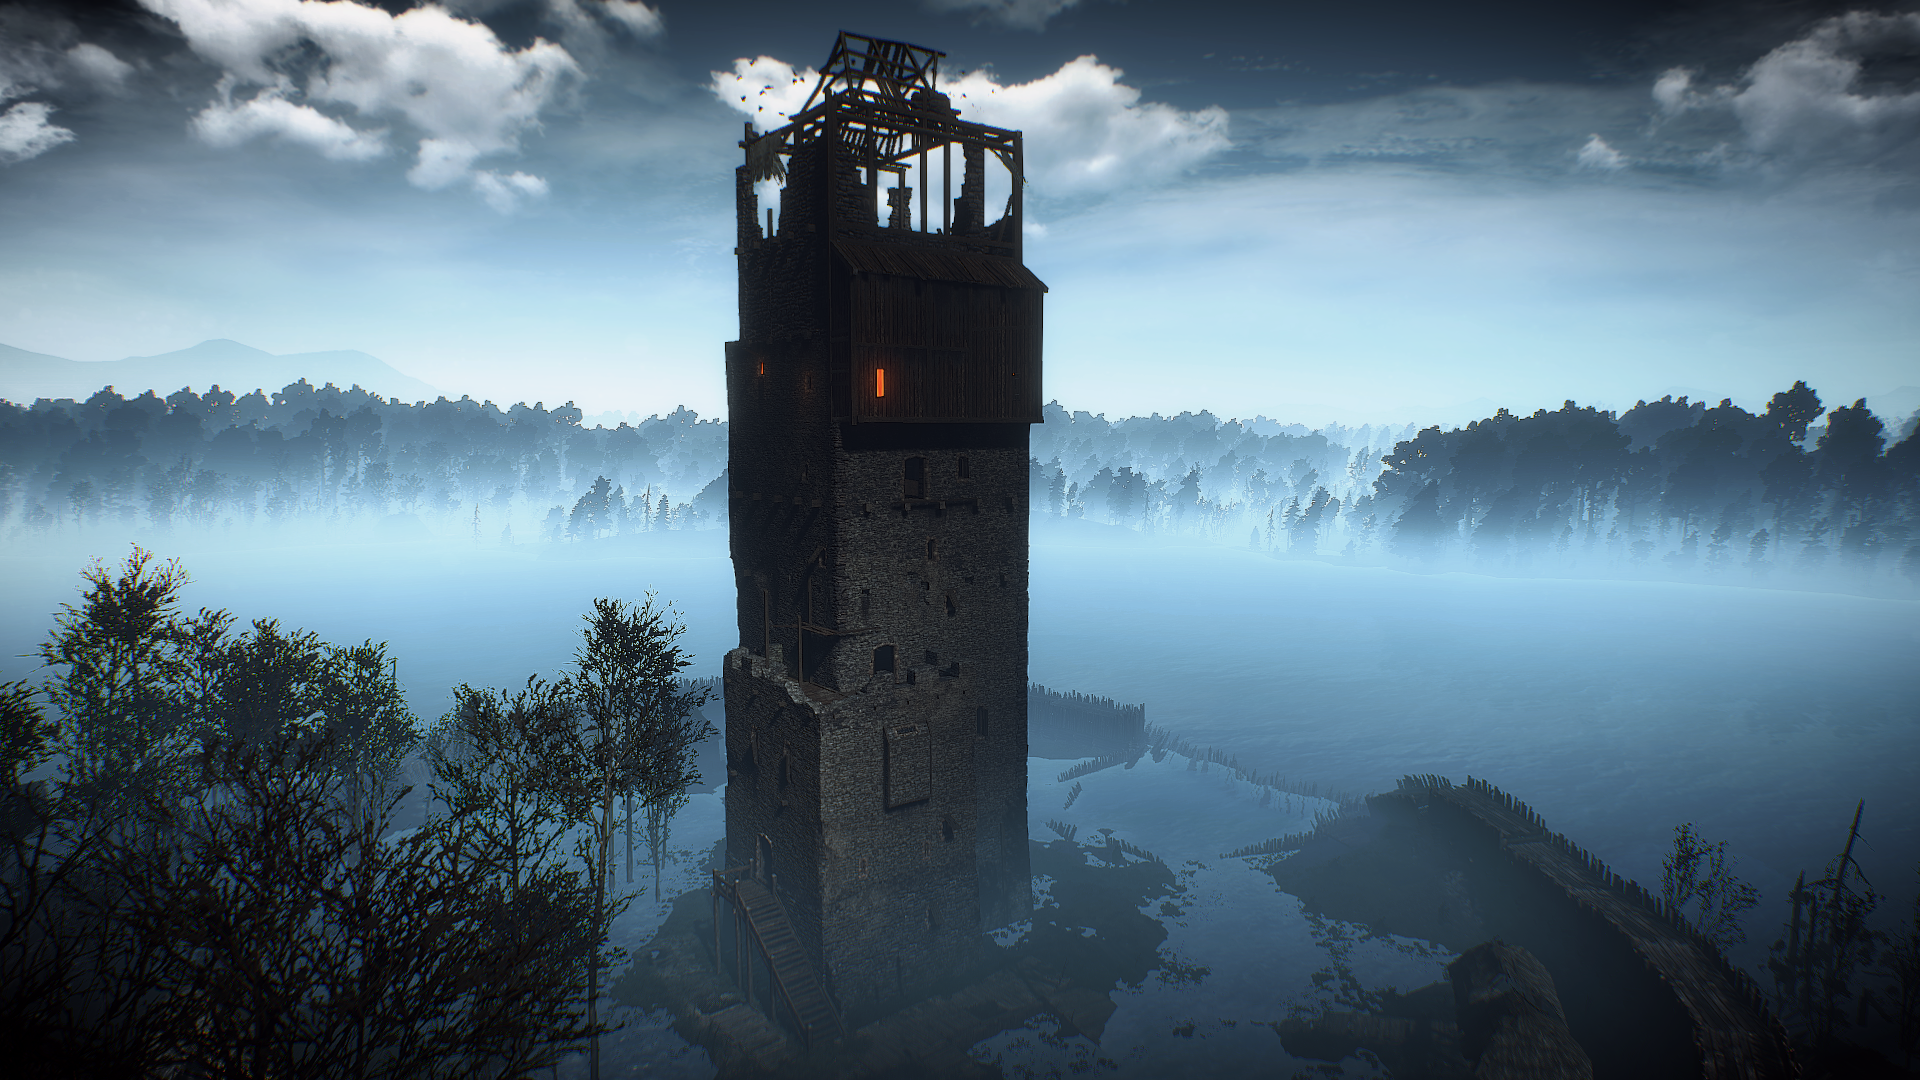 General 1920x1080 The Witcher 3: Wild Hunt video games RPG screen shot tower PC gaming video game landscape